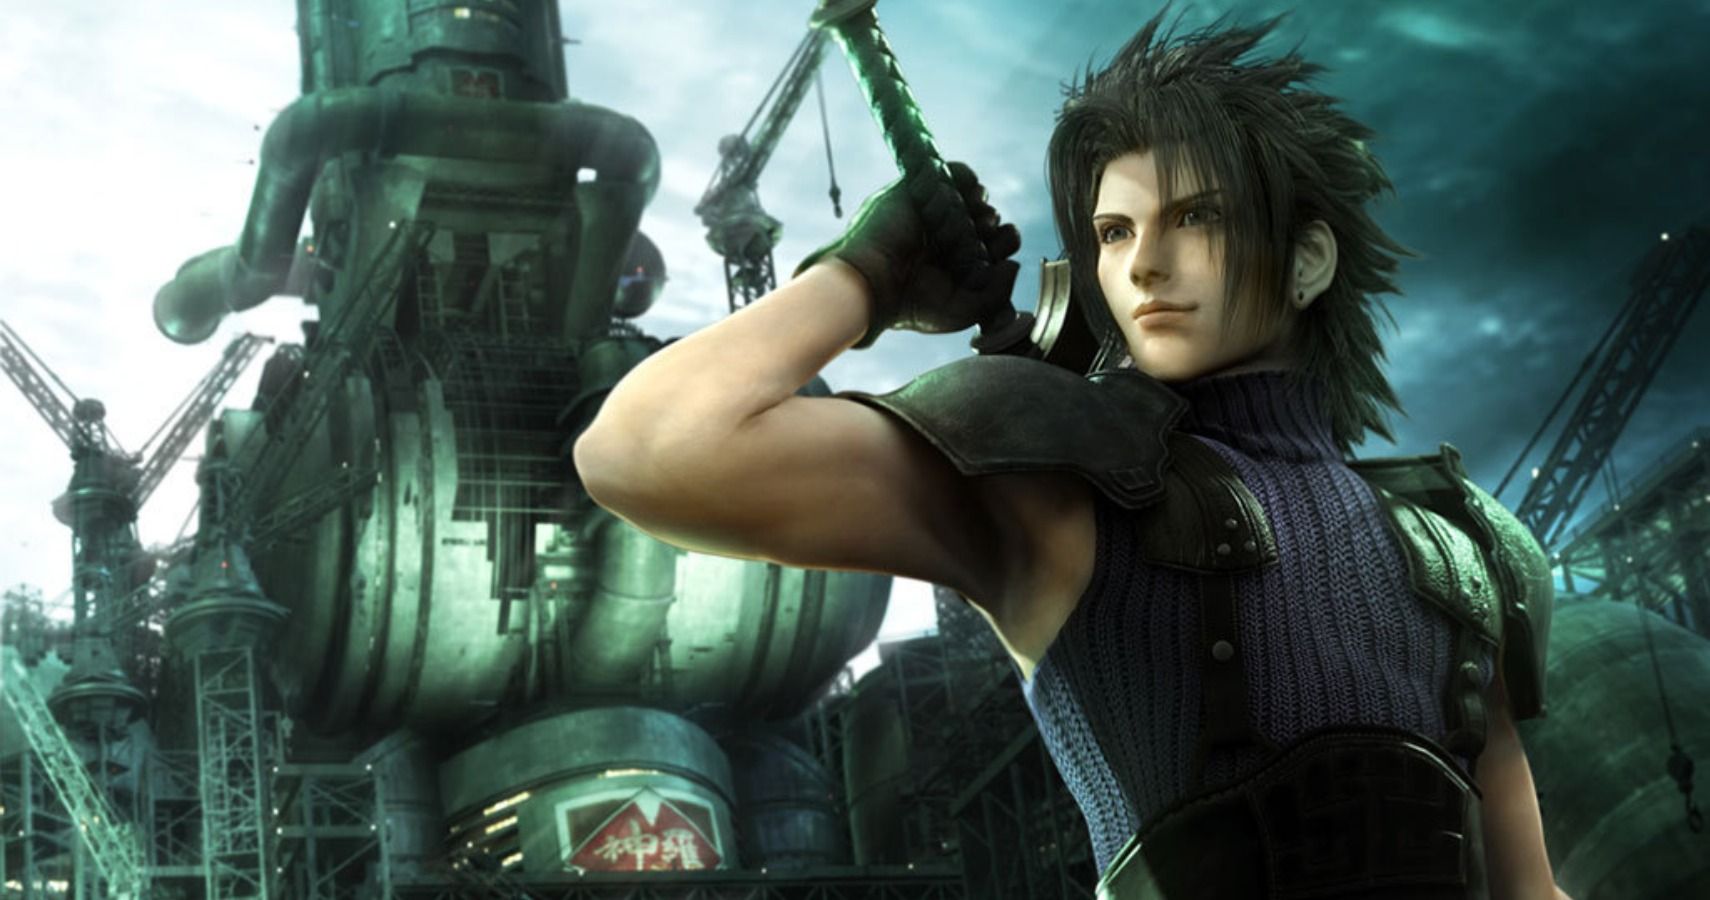 final fantasy 7 hd remake for pc cracked